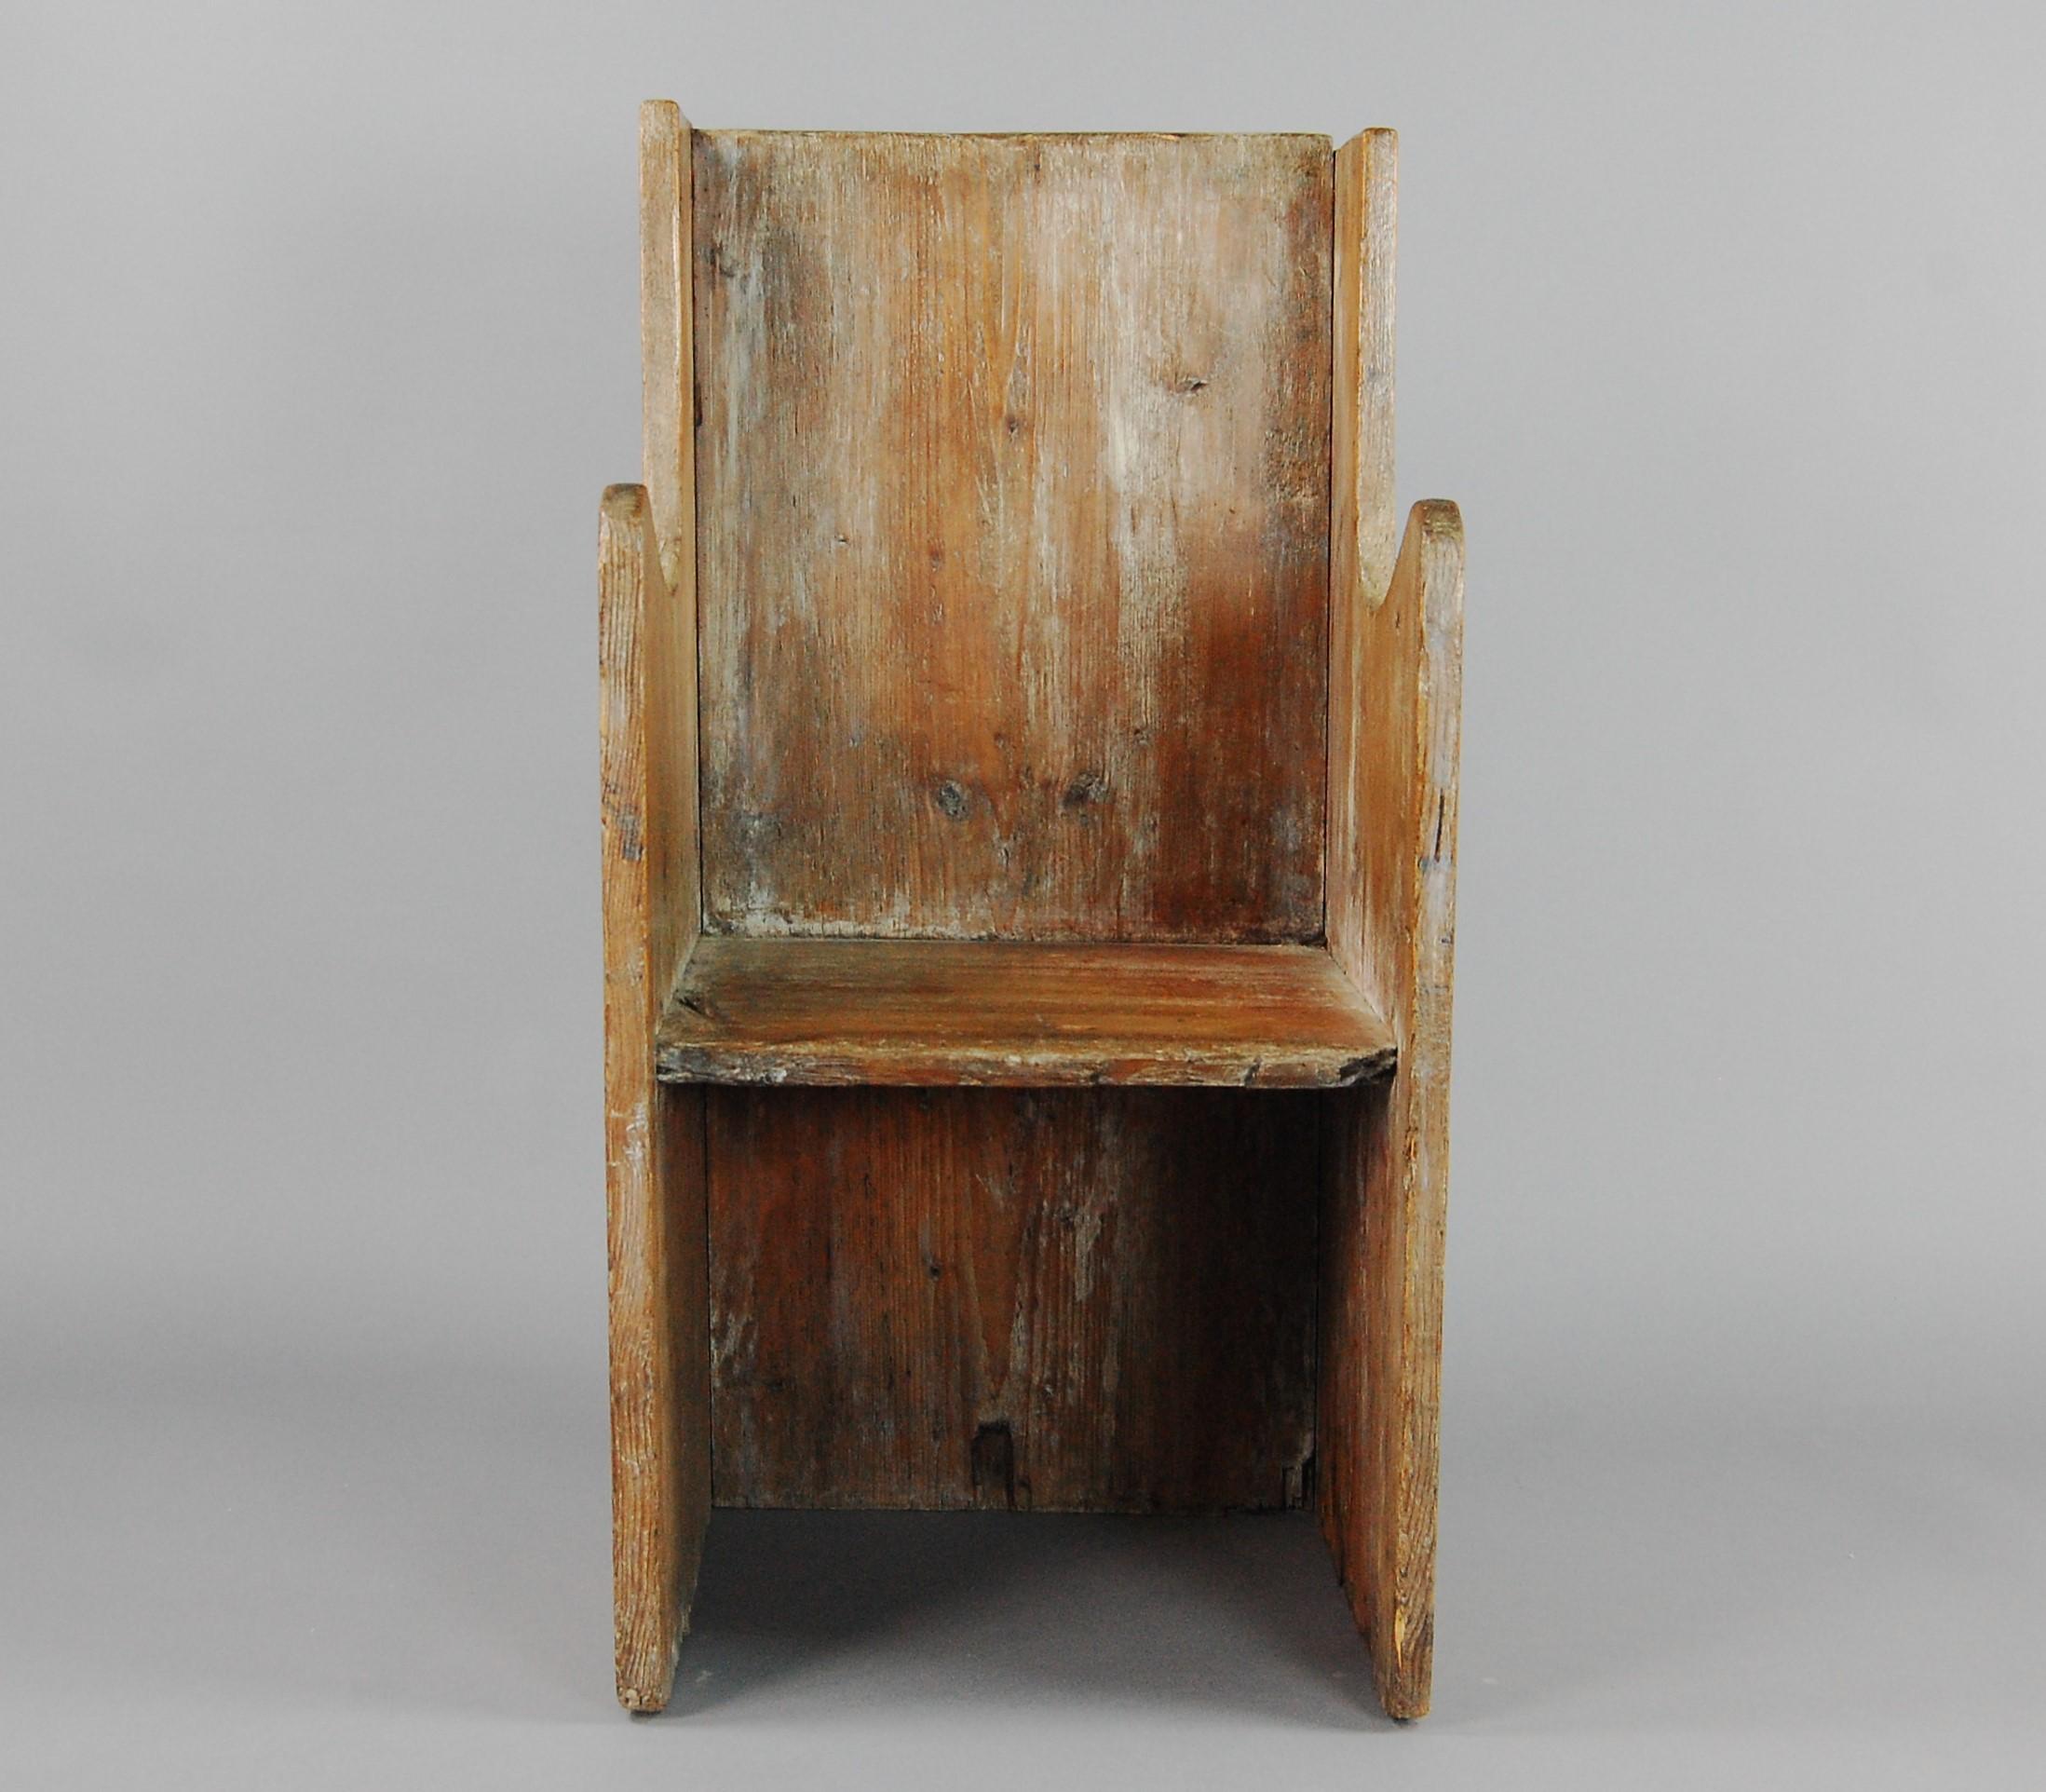 Primitive plank chair or settle. Dating to the late 17th century, wonderful untouched patina. Originating from Grande Chartreuse (1084) the head monastery of the Carthusian religious order founded by St Bruno located North of Grenoble, France, this